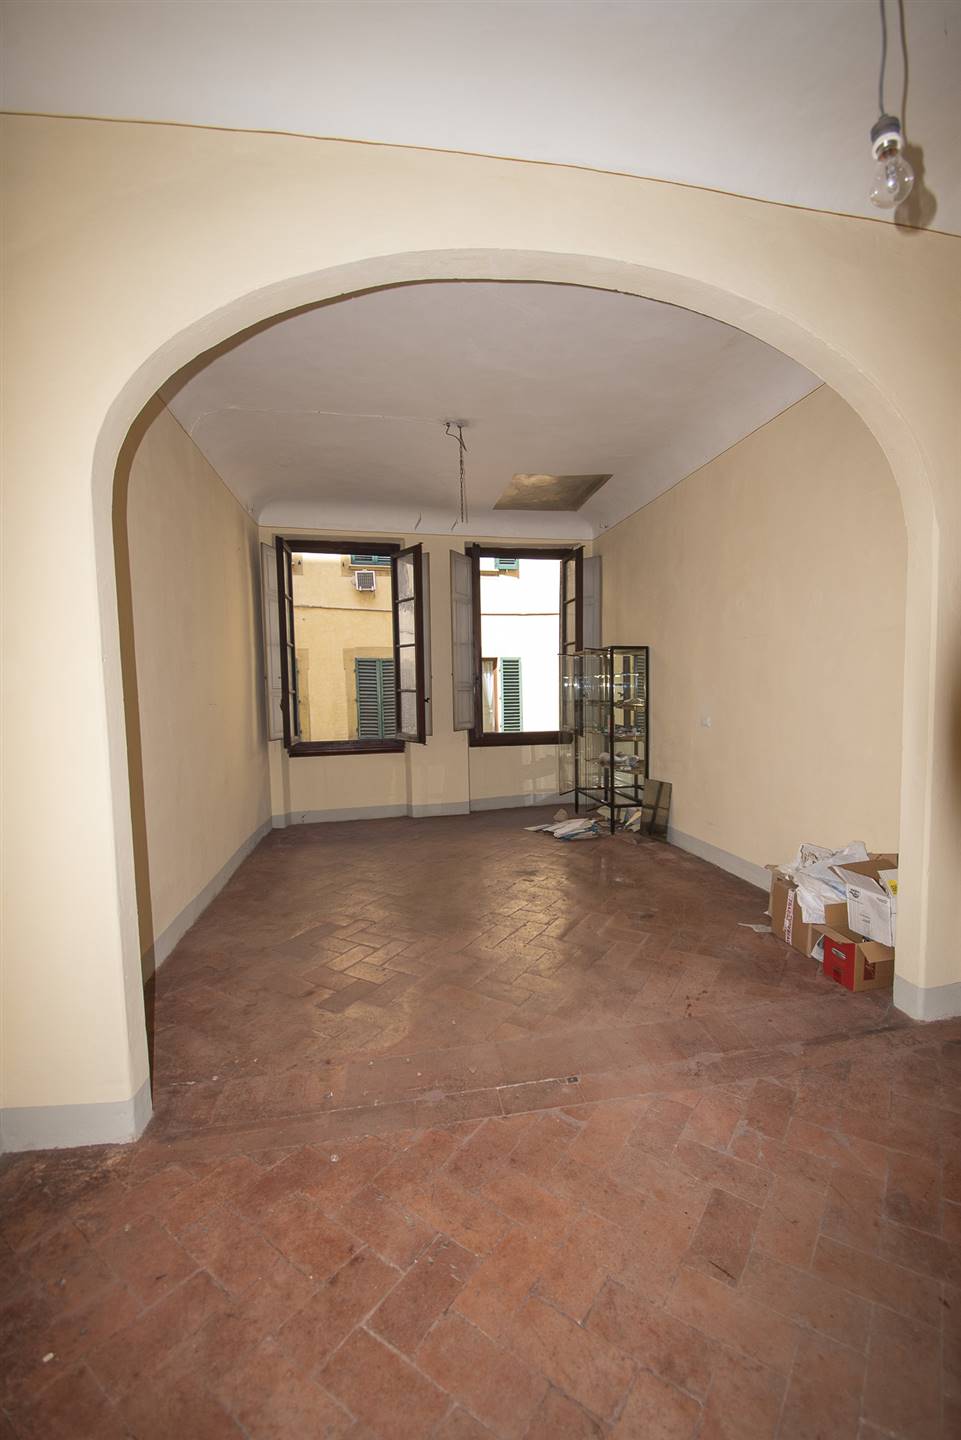 CENTRO STORICO, FIRENZE, Apartment for sale of 150 Sq. mt., Be restored, Heating Non-existent, Energetic class: G, Epi: 230 kwh/m2 year, placed at 1°,